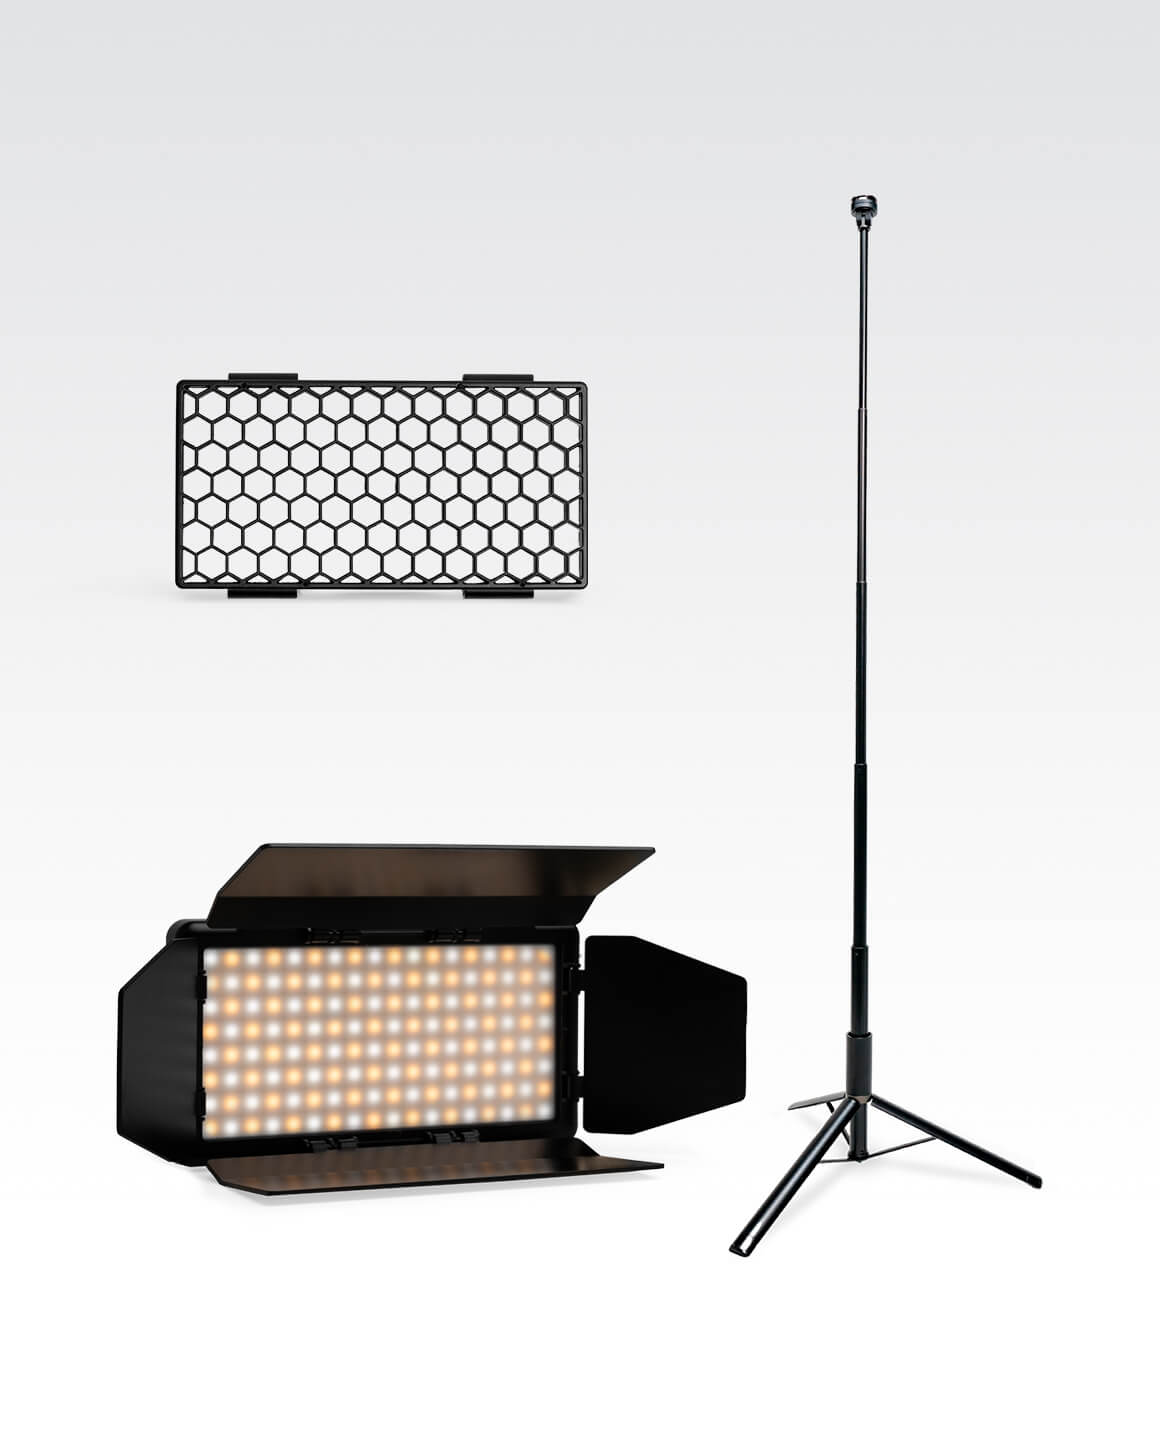 Lume Cube RGB Panel Pro Lighting Kit including RGB Panel Pro with 5-Foot Adjustable Light Stand, Honeycomb Grid and Barn Doors accessories.